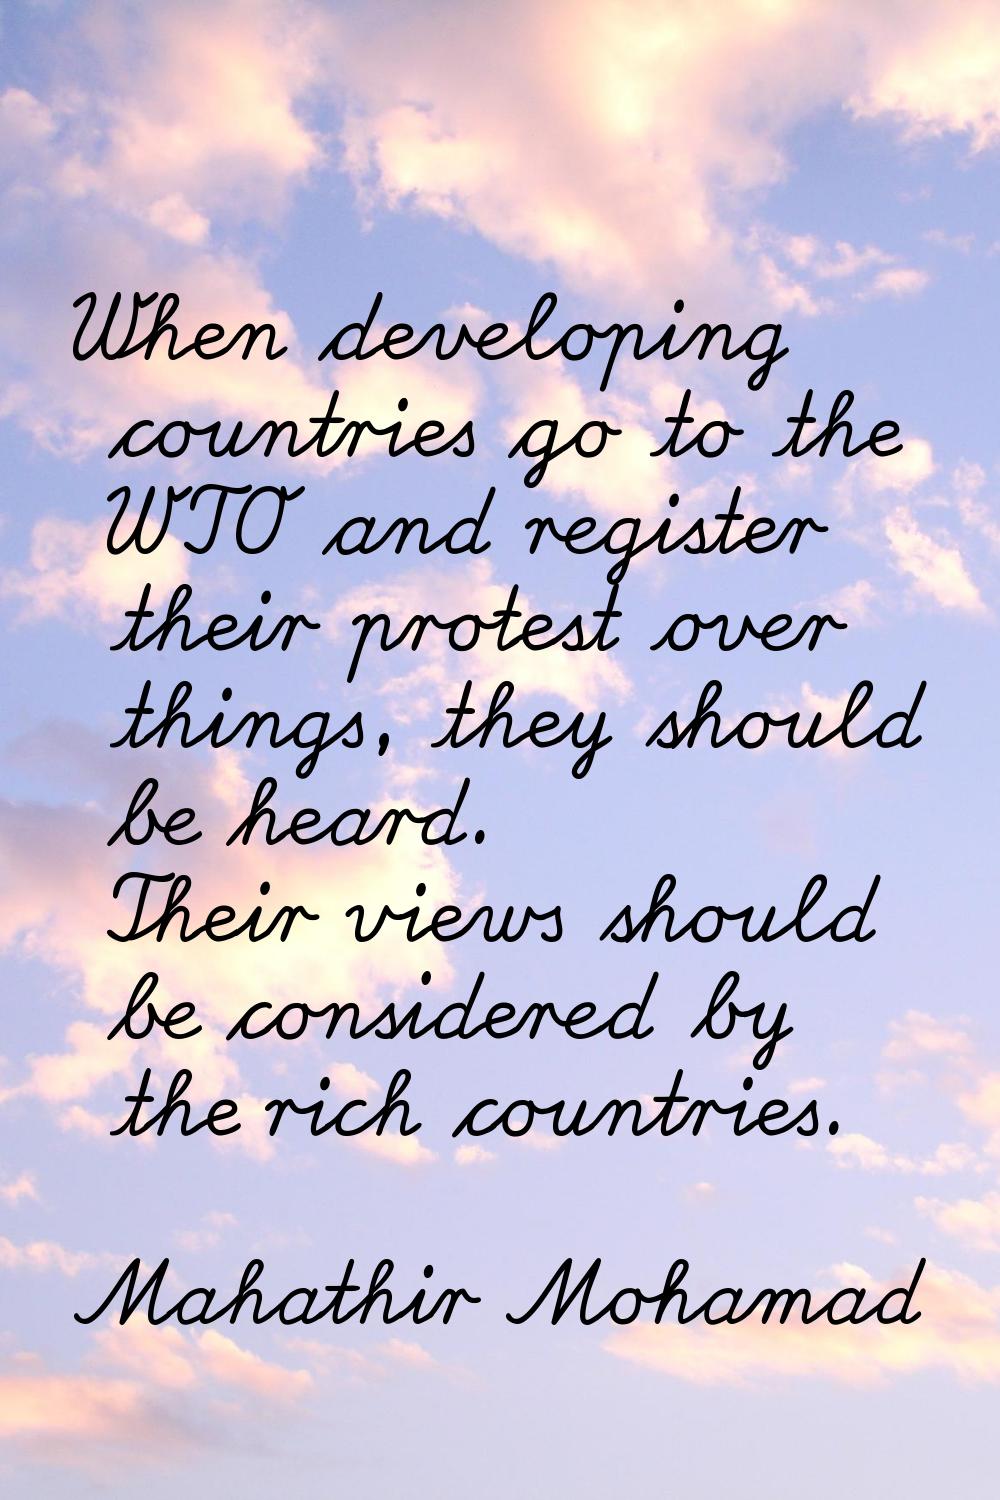 When developing countries go to the WTO and register their protest over things, they should be hear